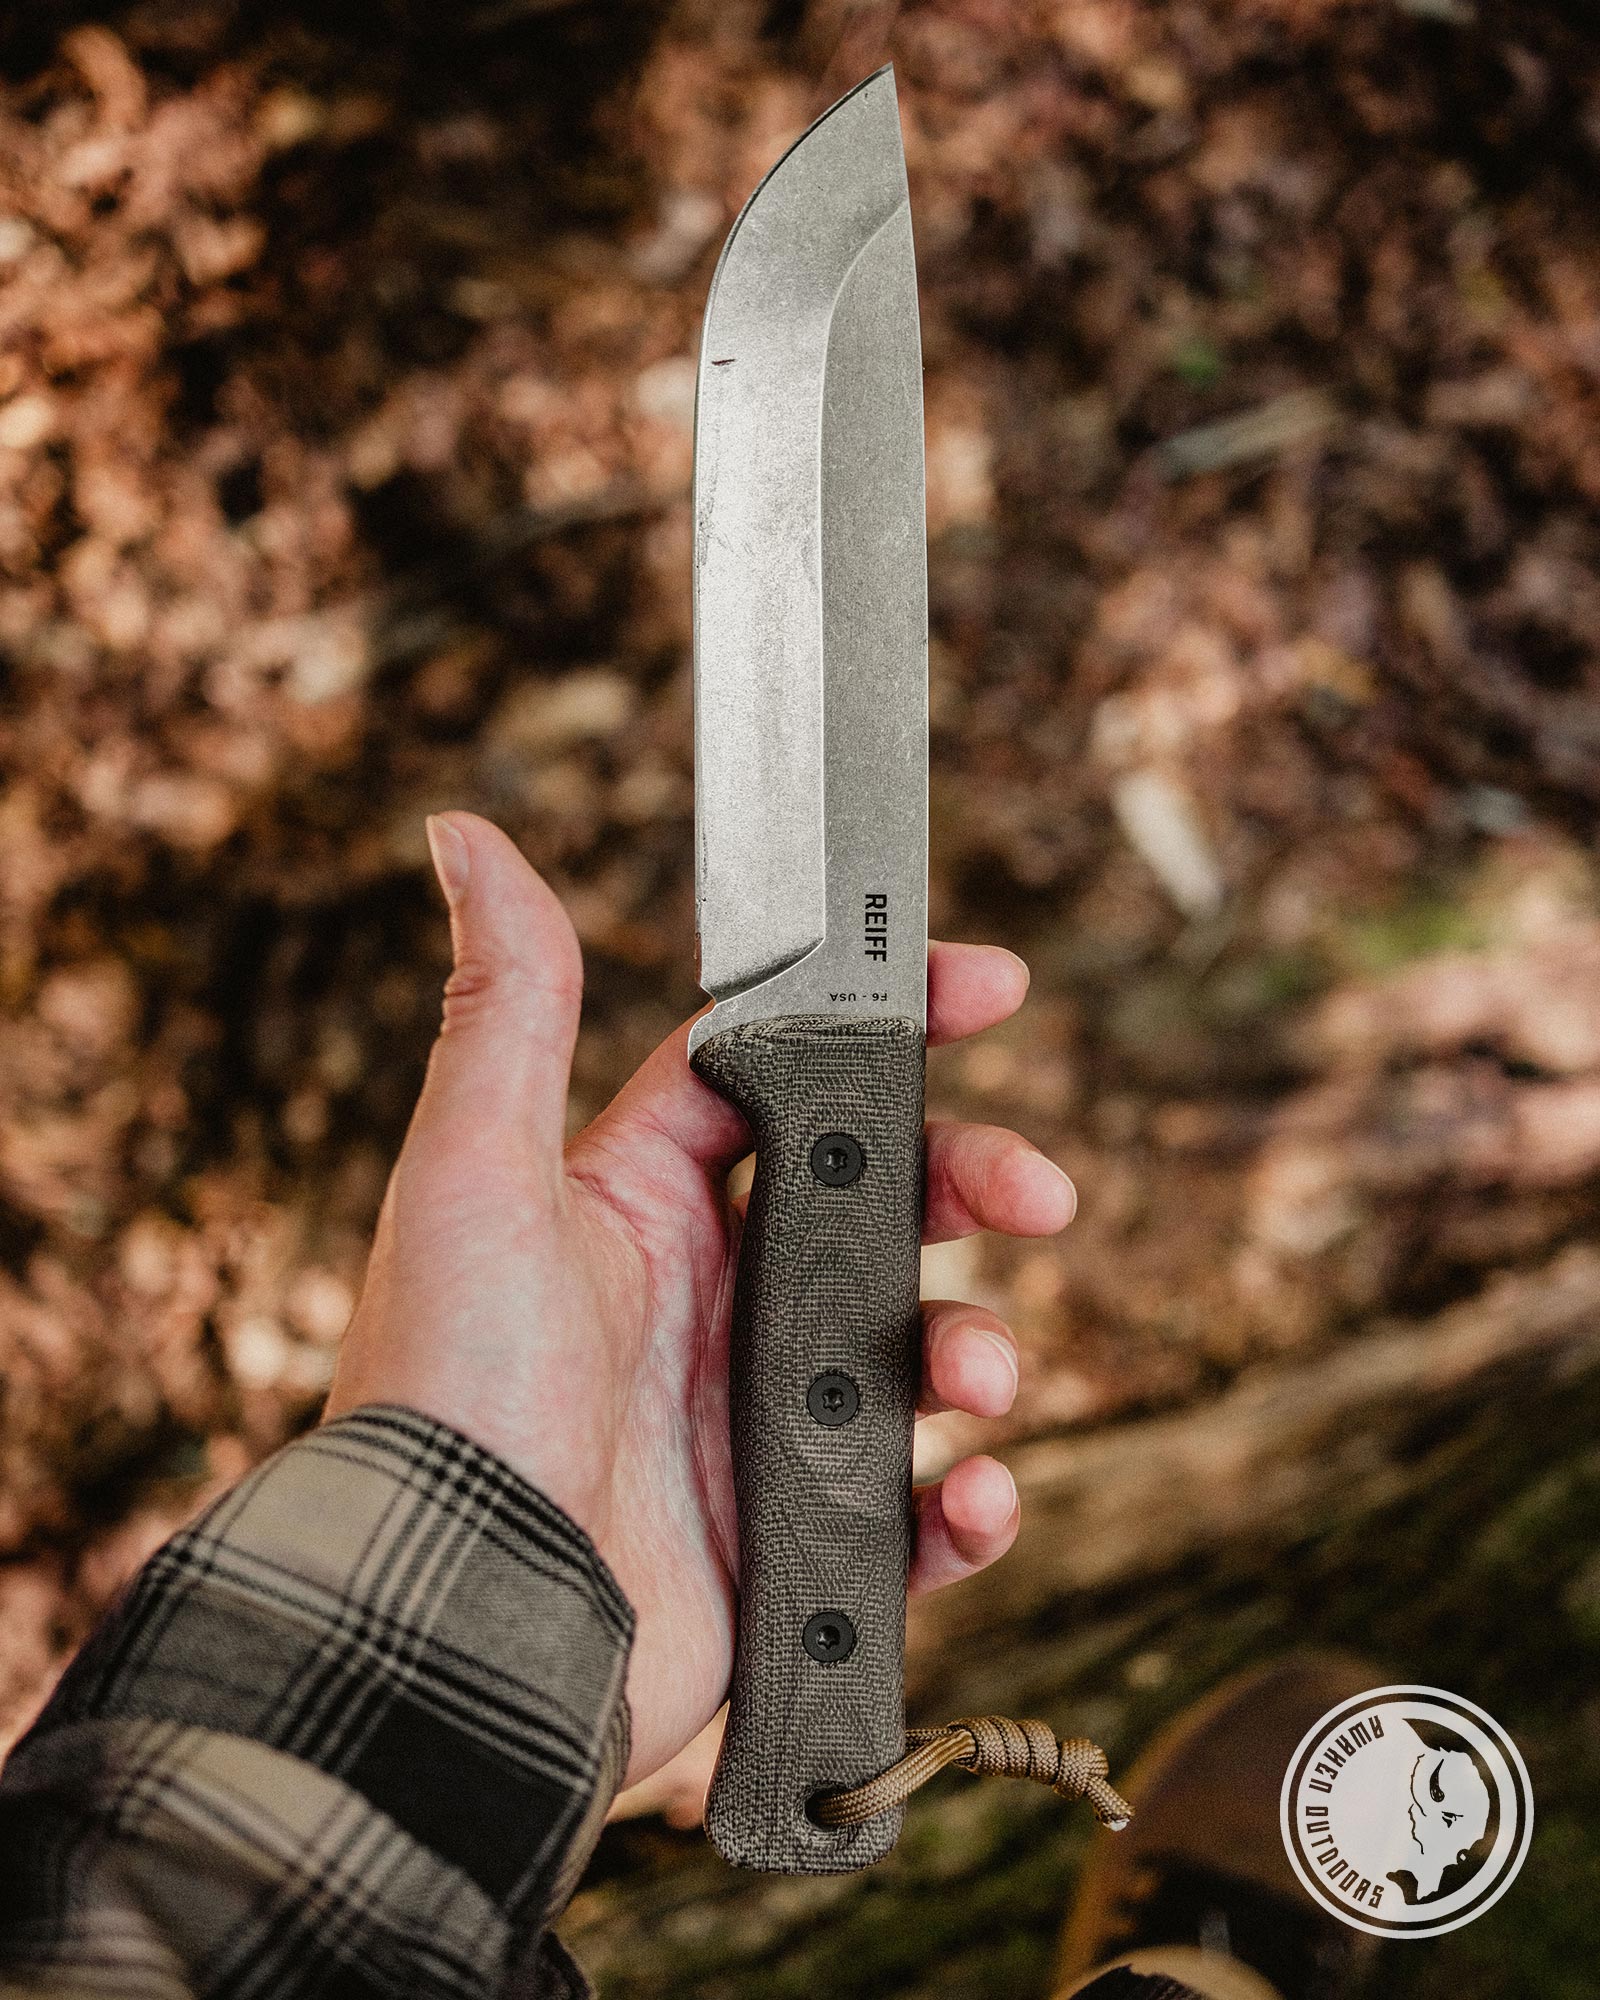 Reiff Knives F6 Review